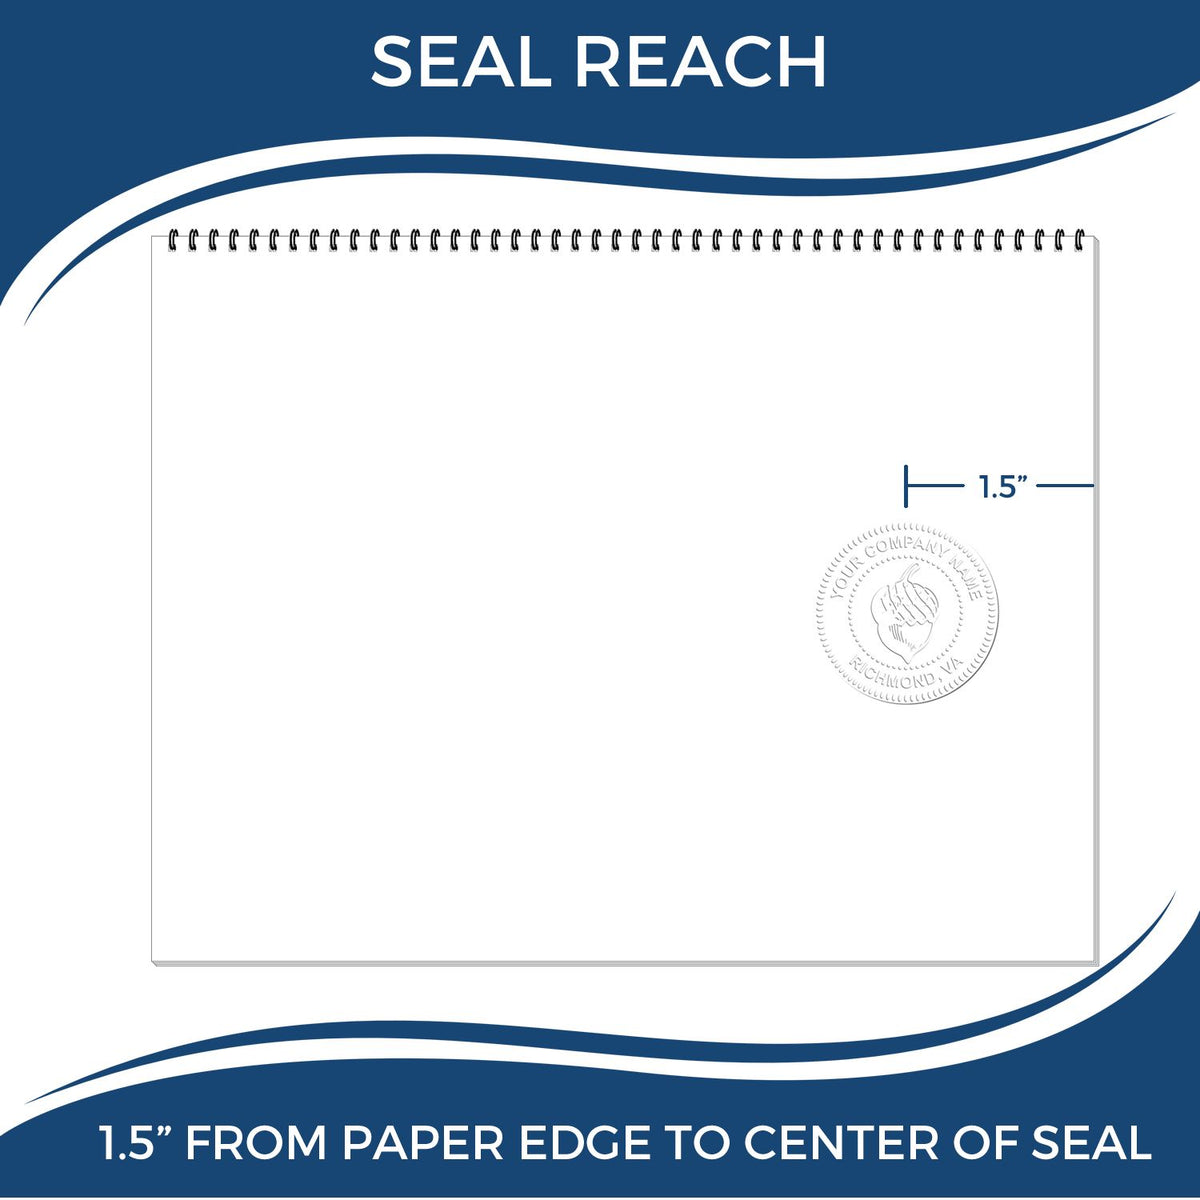 An infographic showing the seal reach which is represented by a ruler and a miniature seal image of the Hybrid South Carolina Landscape Architect Seal